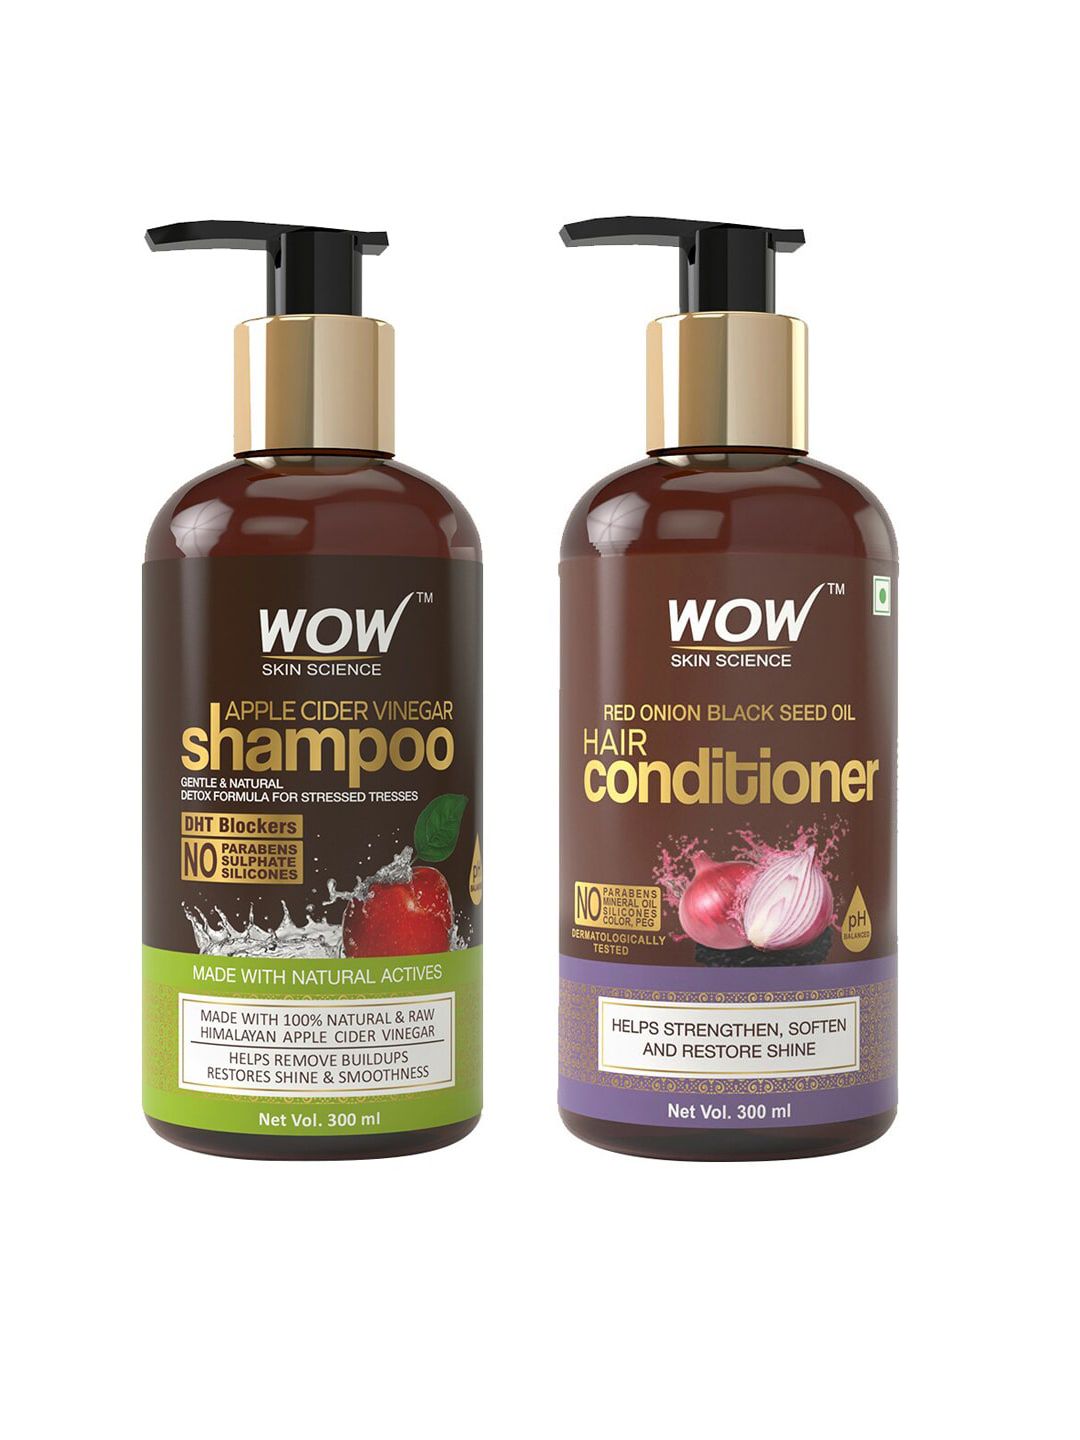 WOW SKIN SCIENCE Unisex Set of ACV Shampoo & Onion Conditioner - 600 ml Price in India